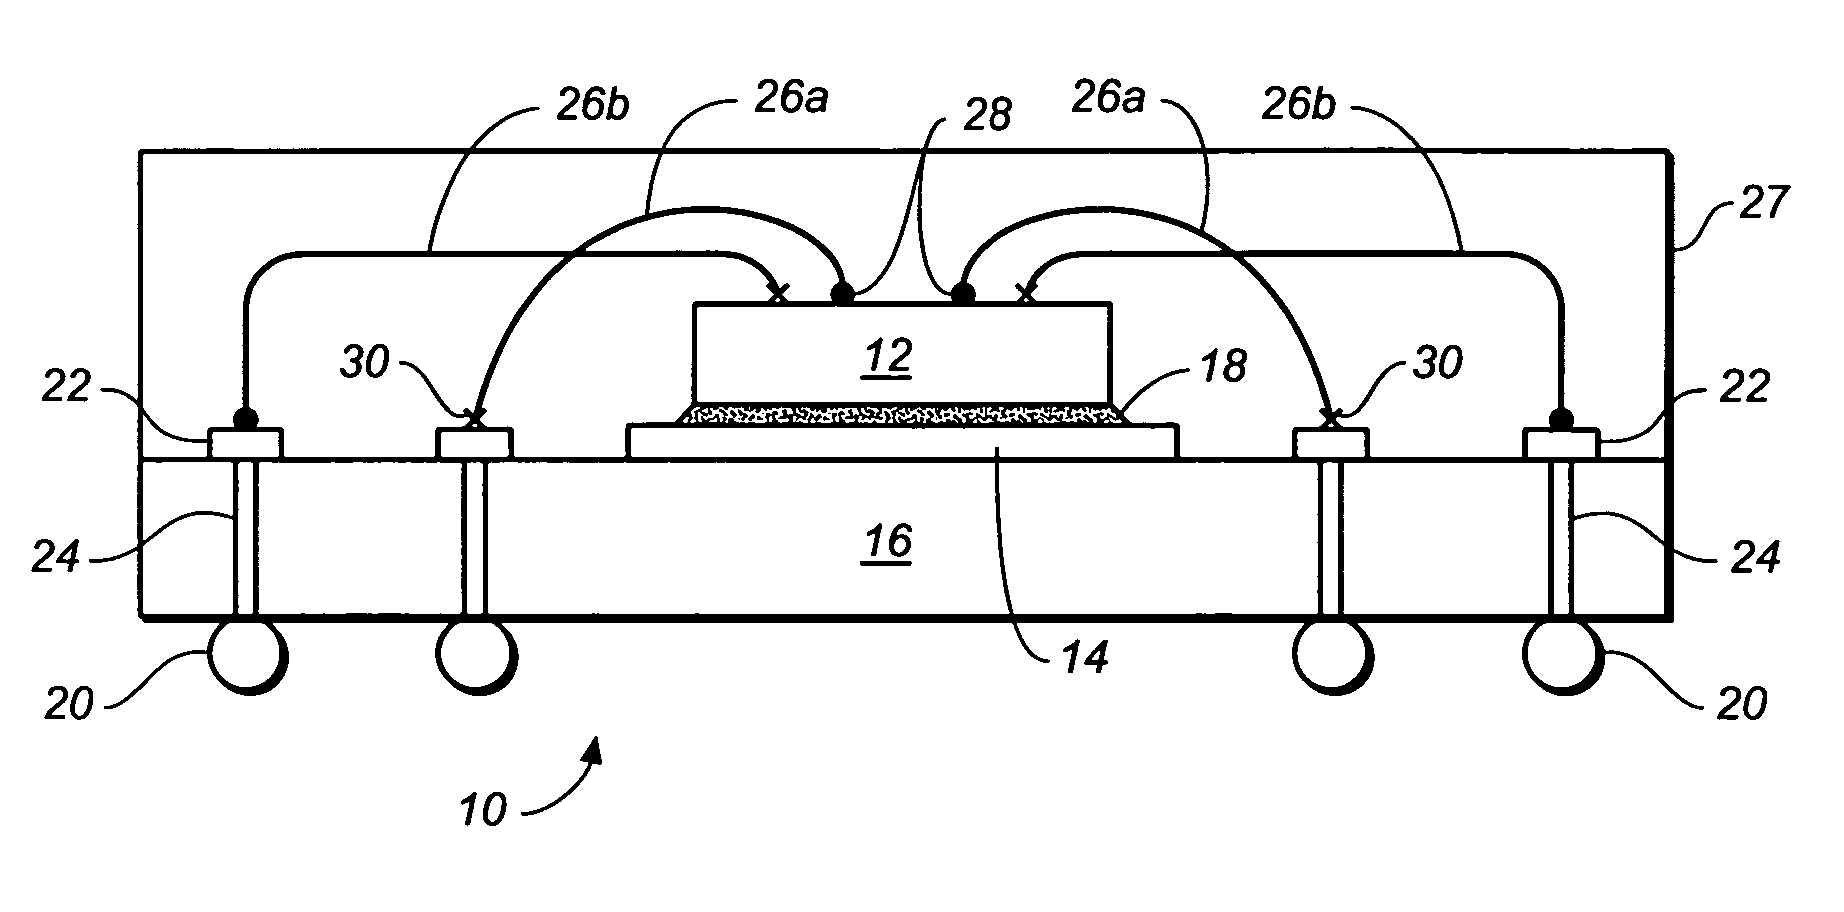 Semiconductor package with wire bond arrangement to reduce cross talk for high speed circuits